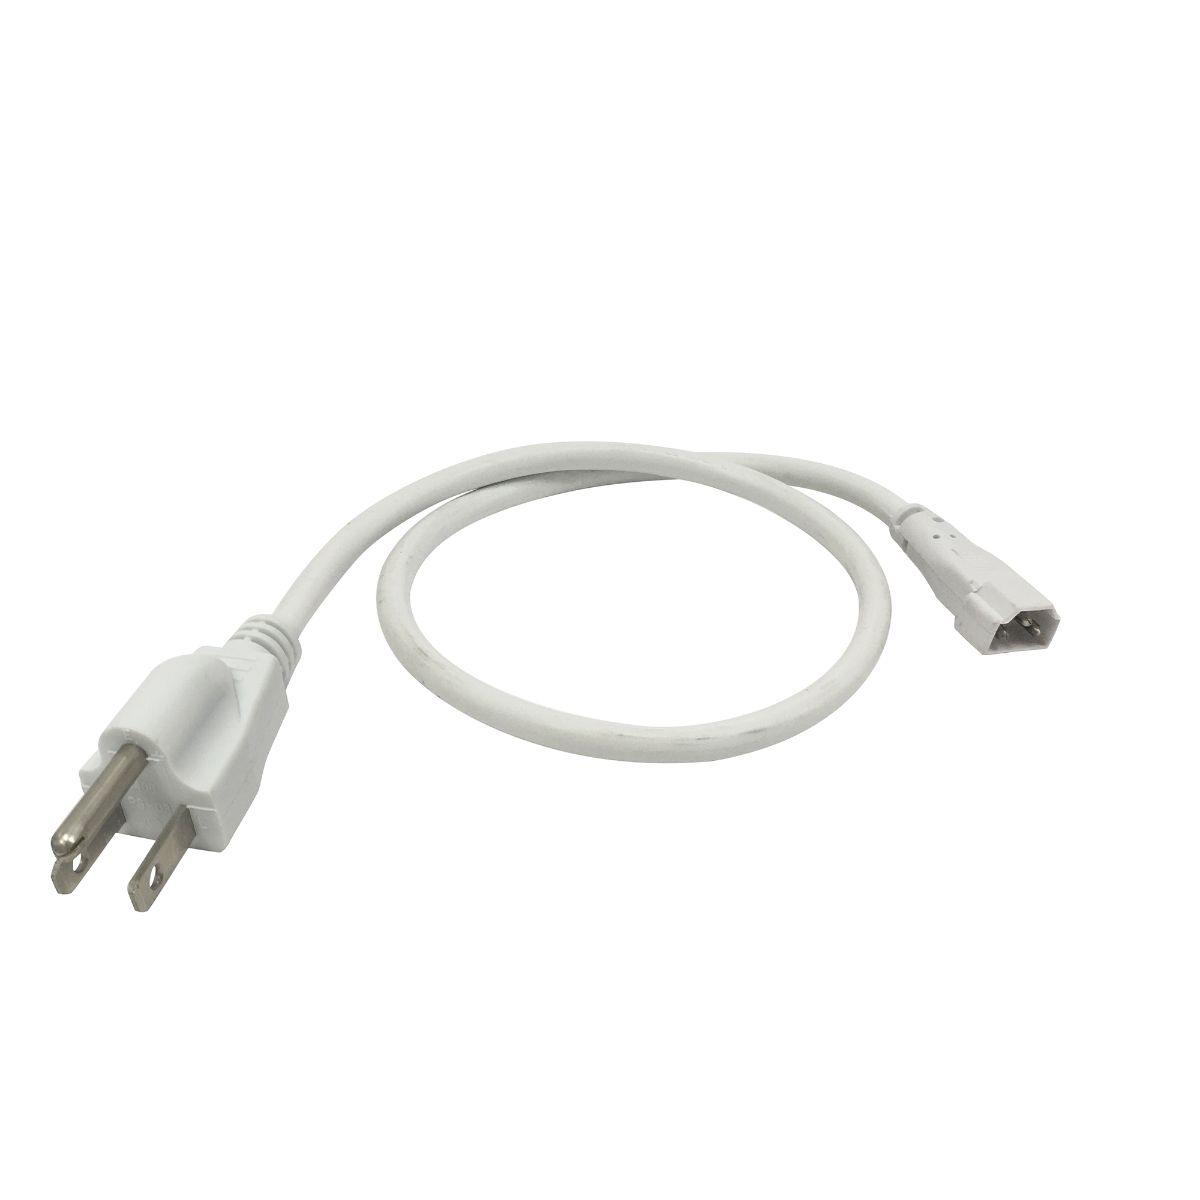 72in. Grounded Power Cord for Bravo FROST LED Under Cabinet Lights - Bees Lighting